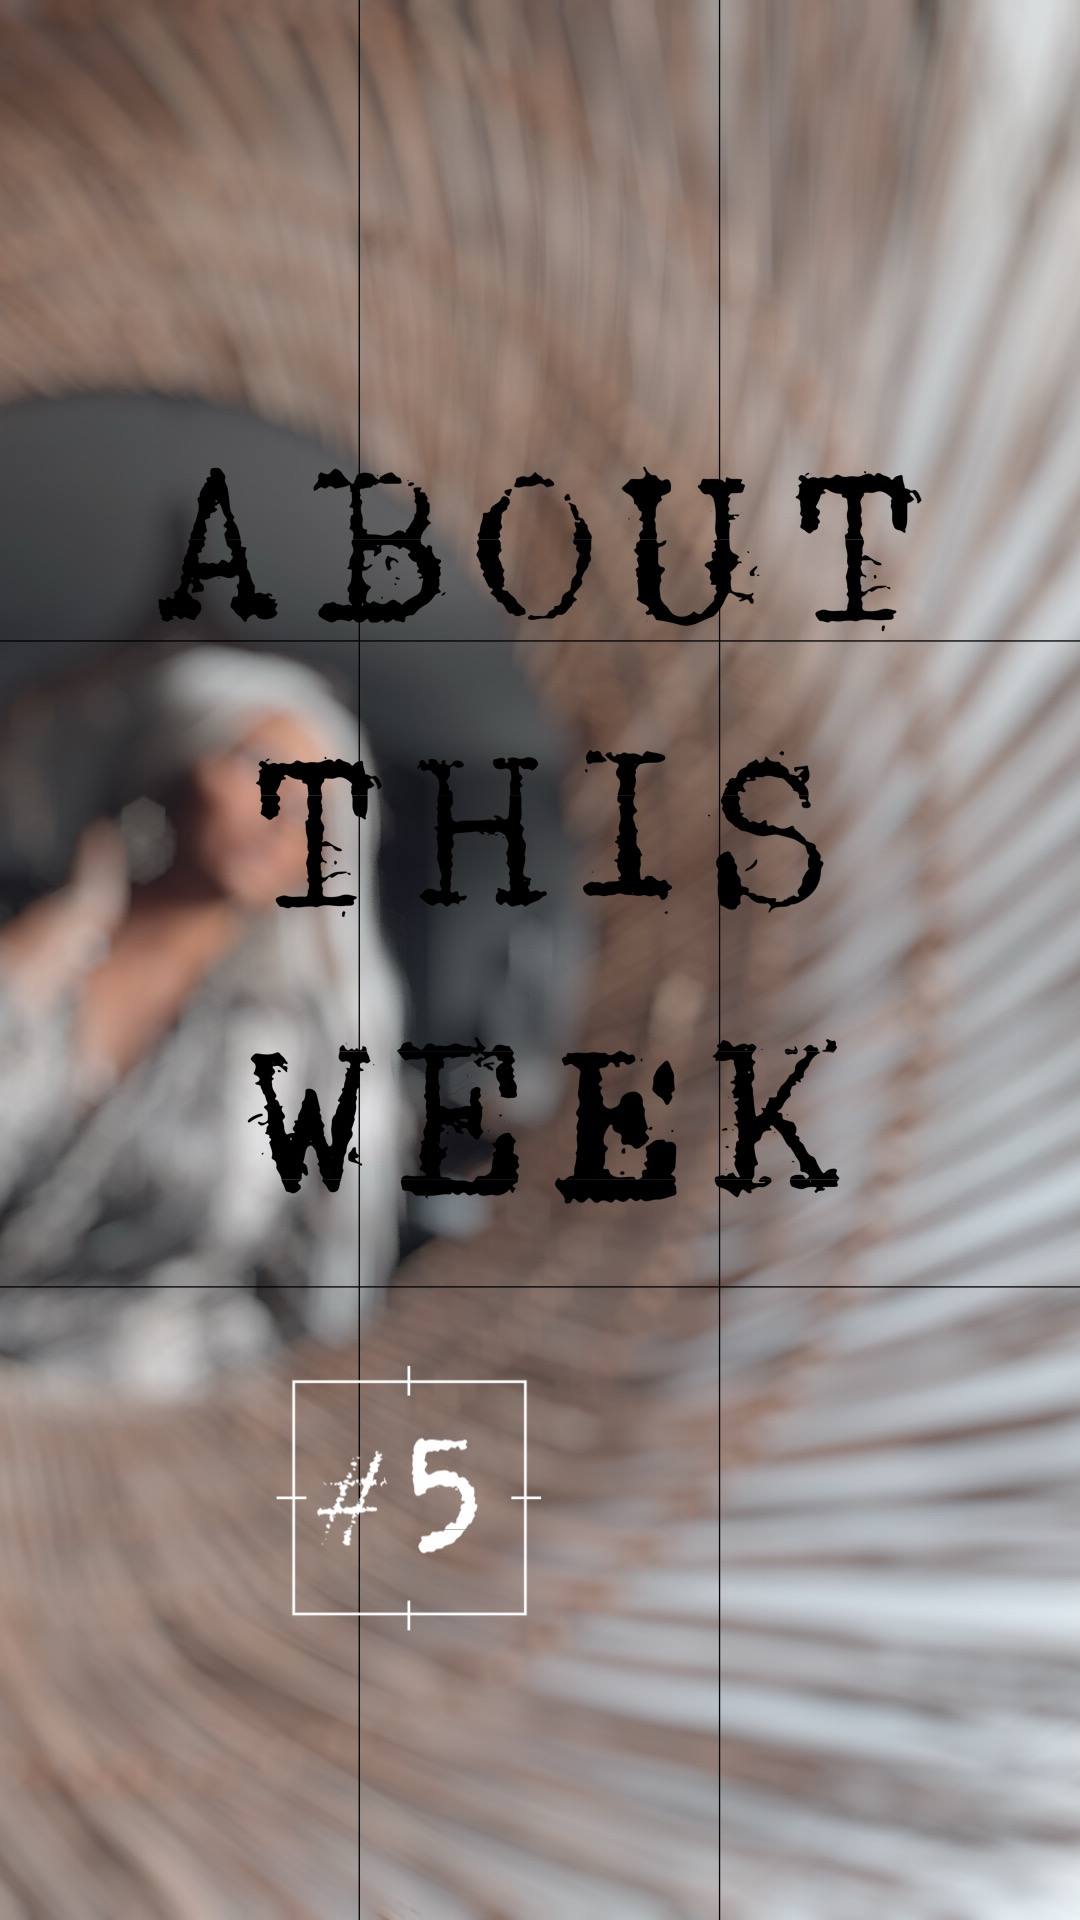 About this week #5